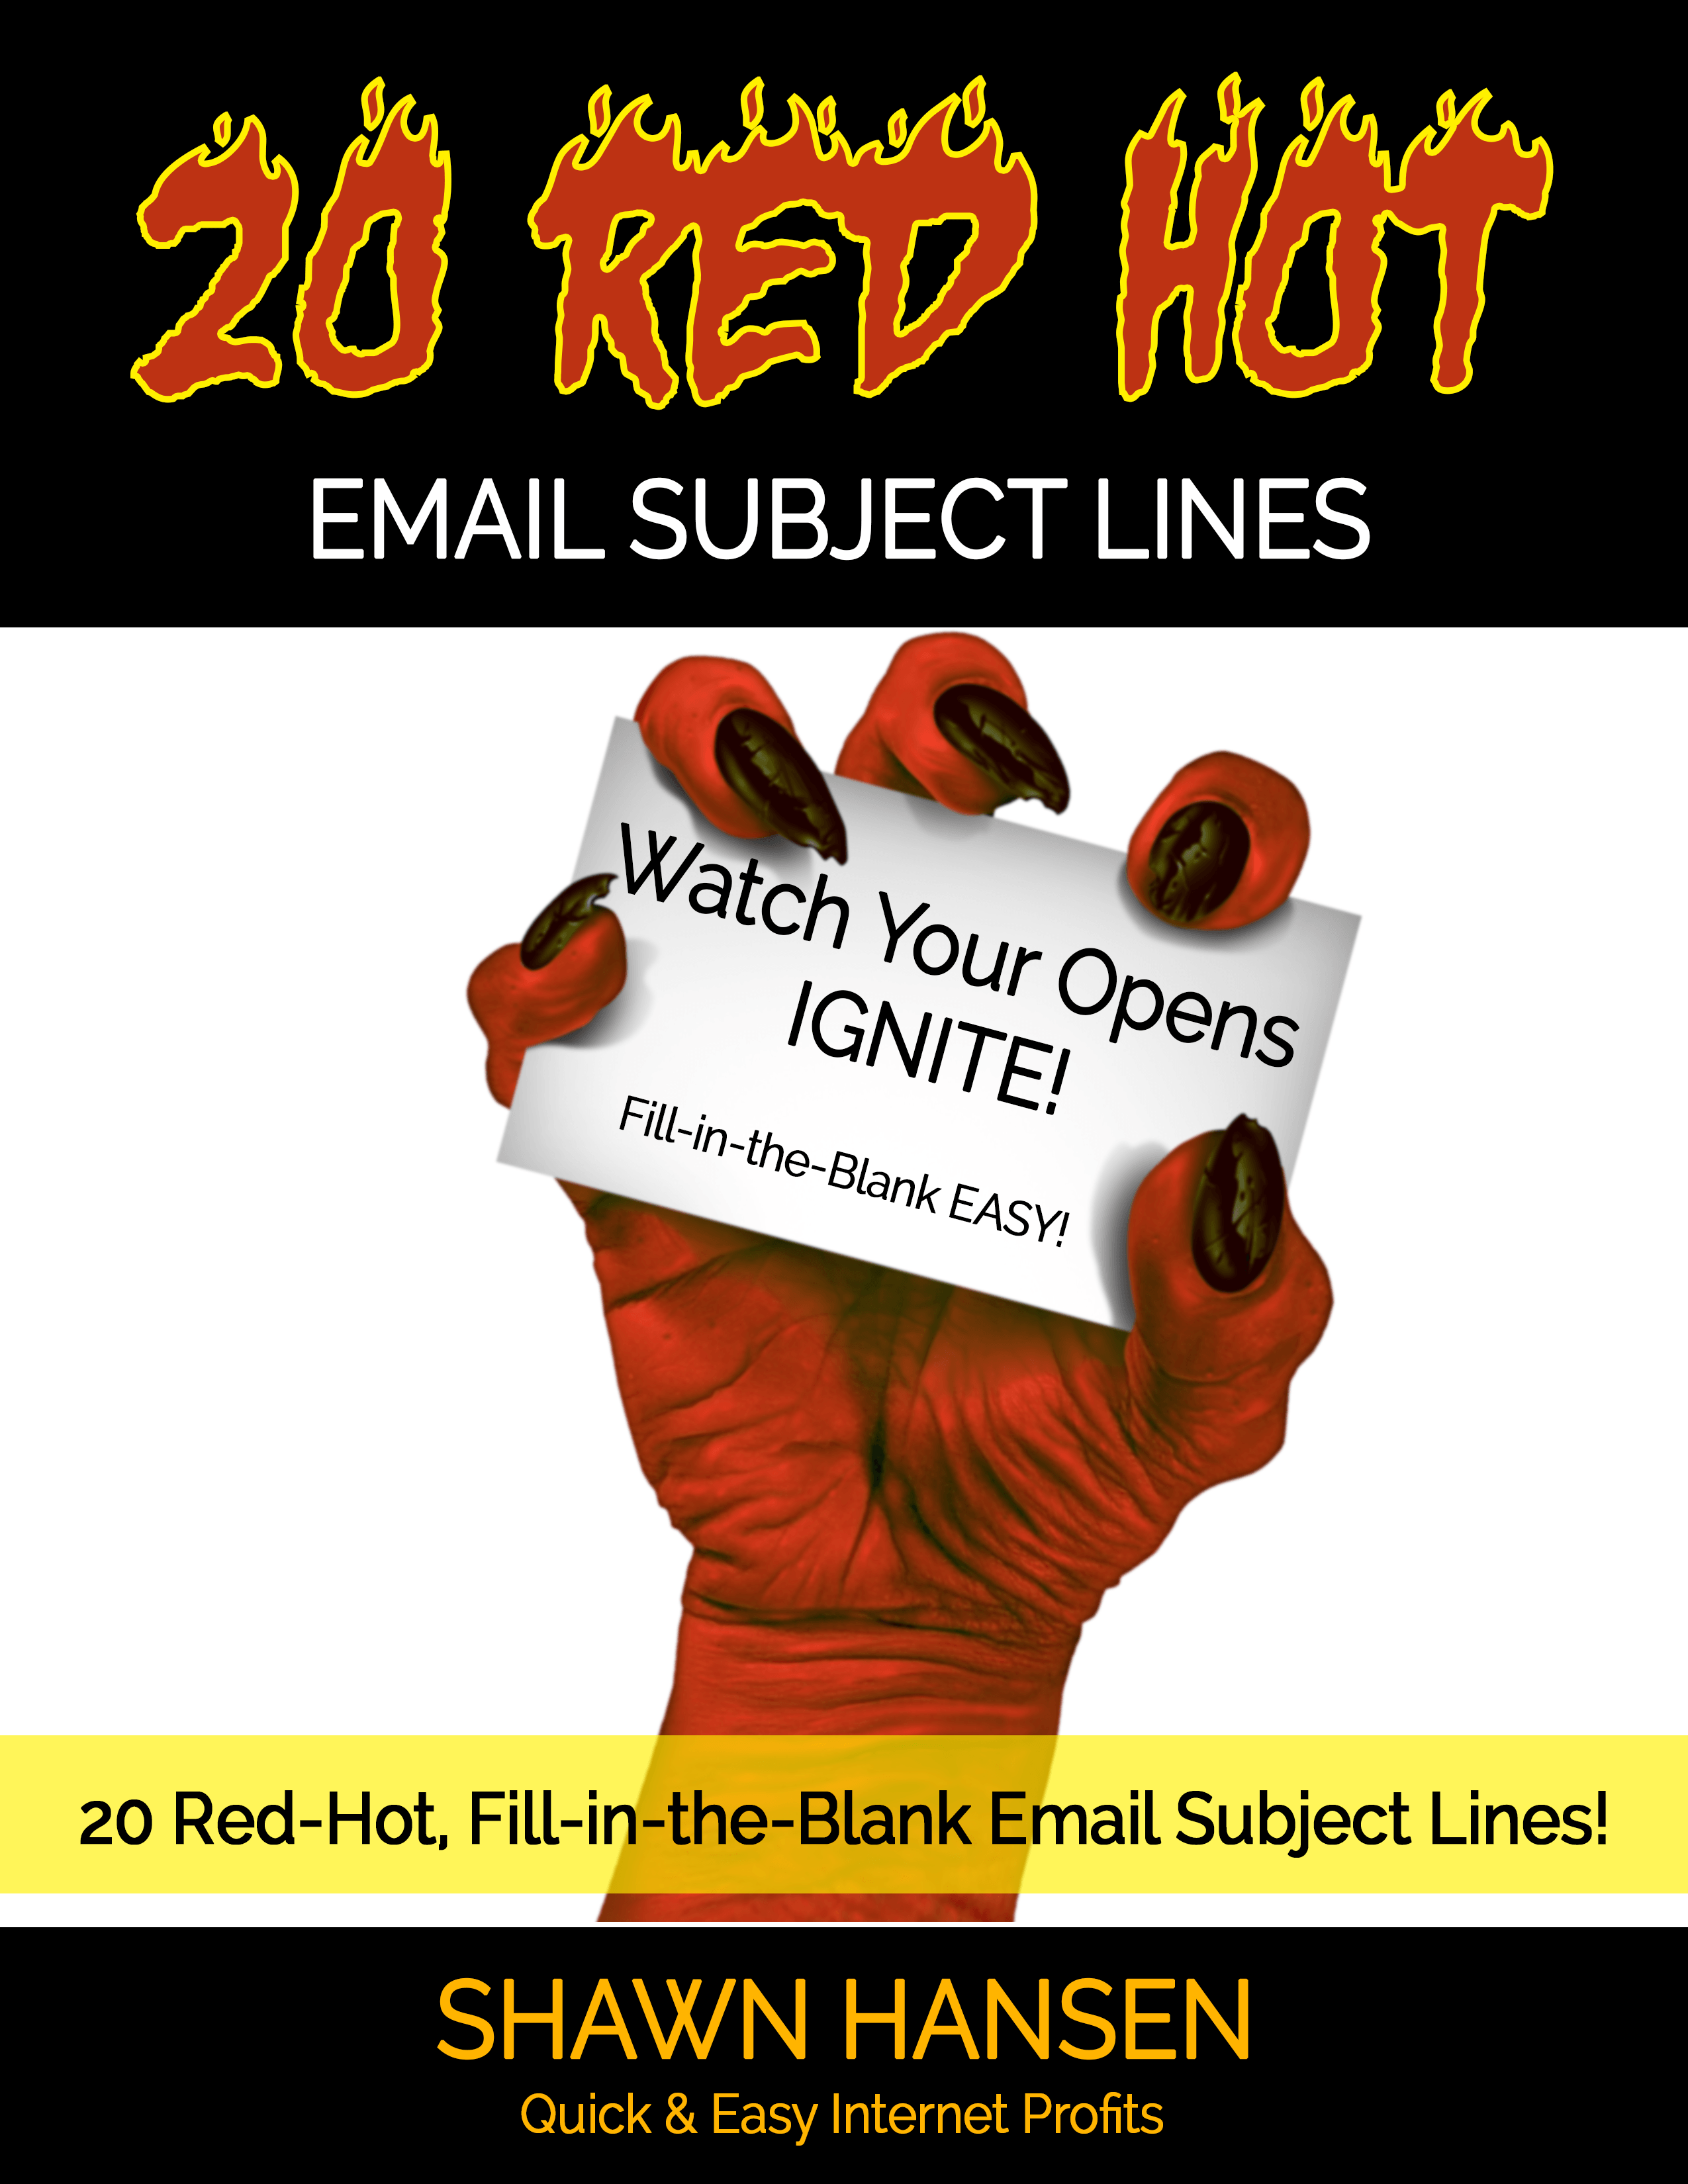 20 Red-Hot Email Subject Lines by Shawn Hansen